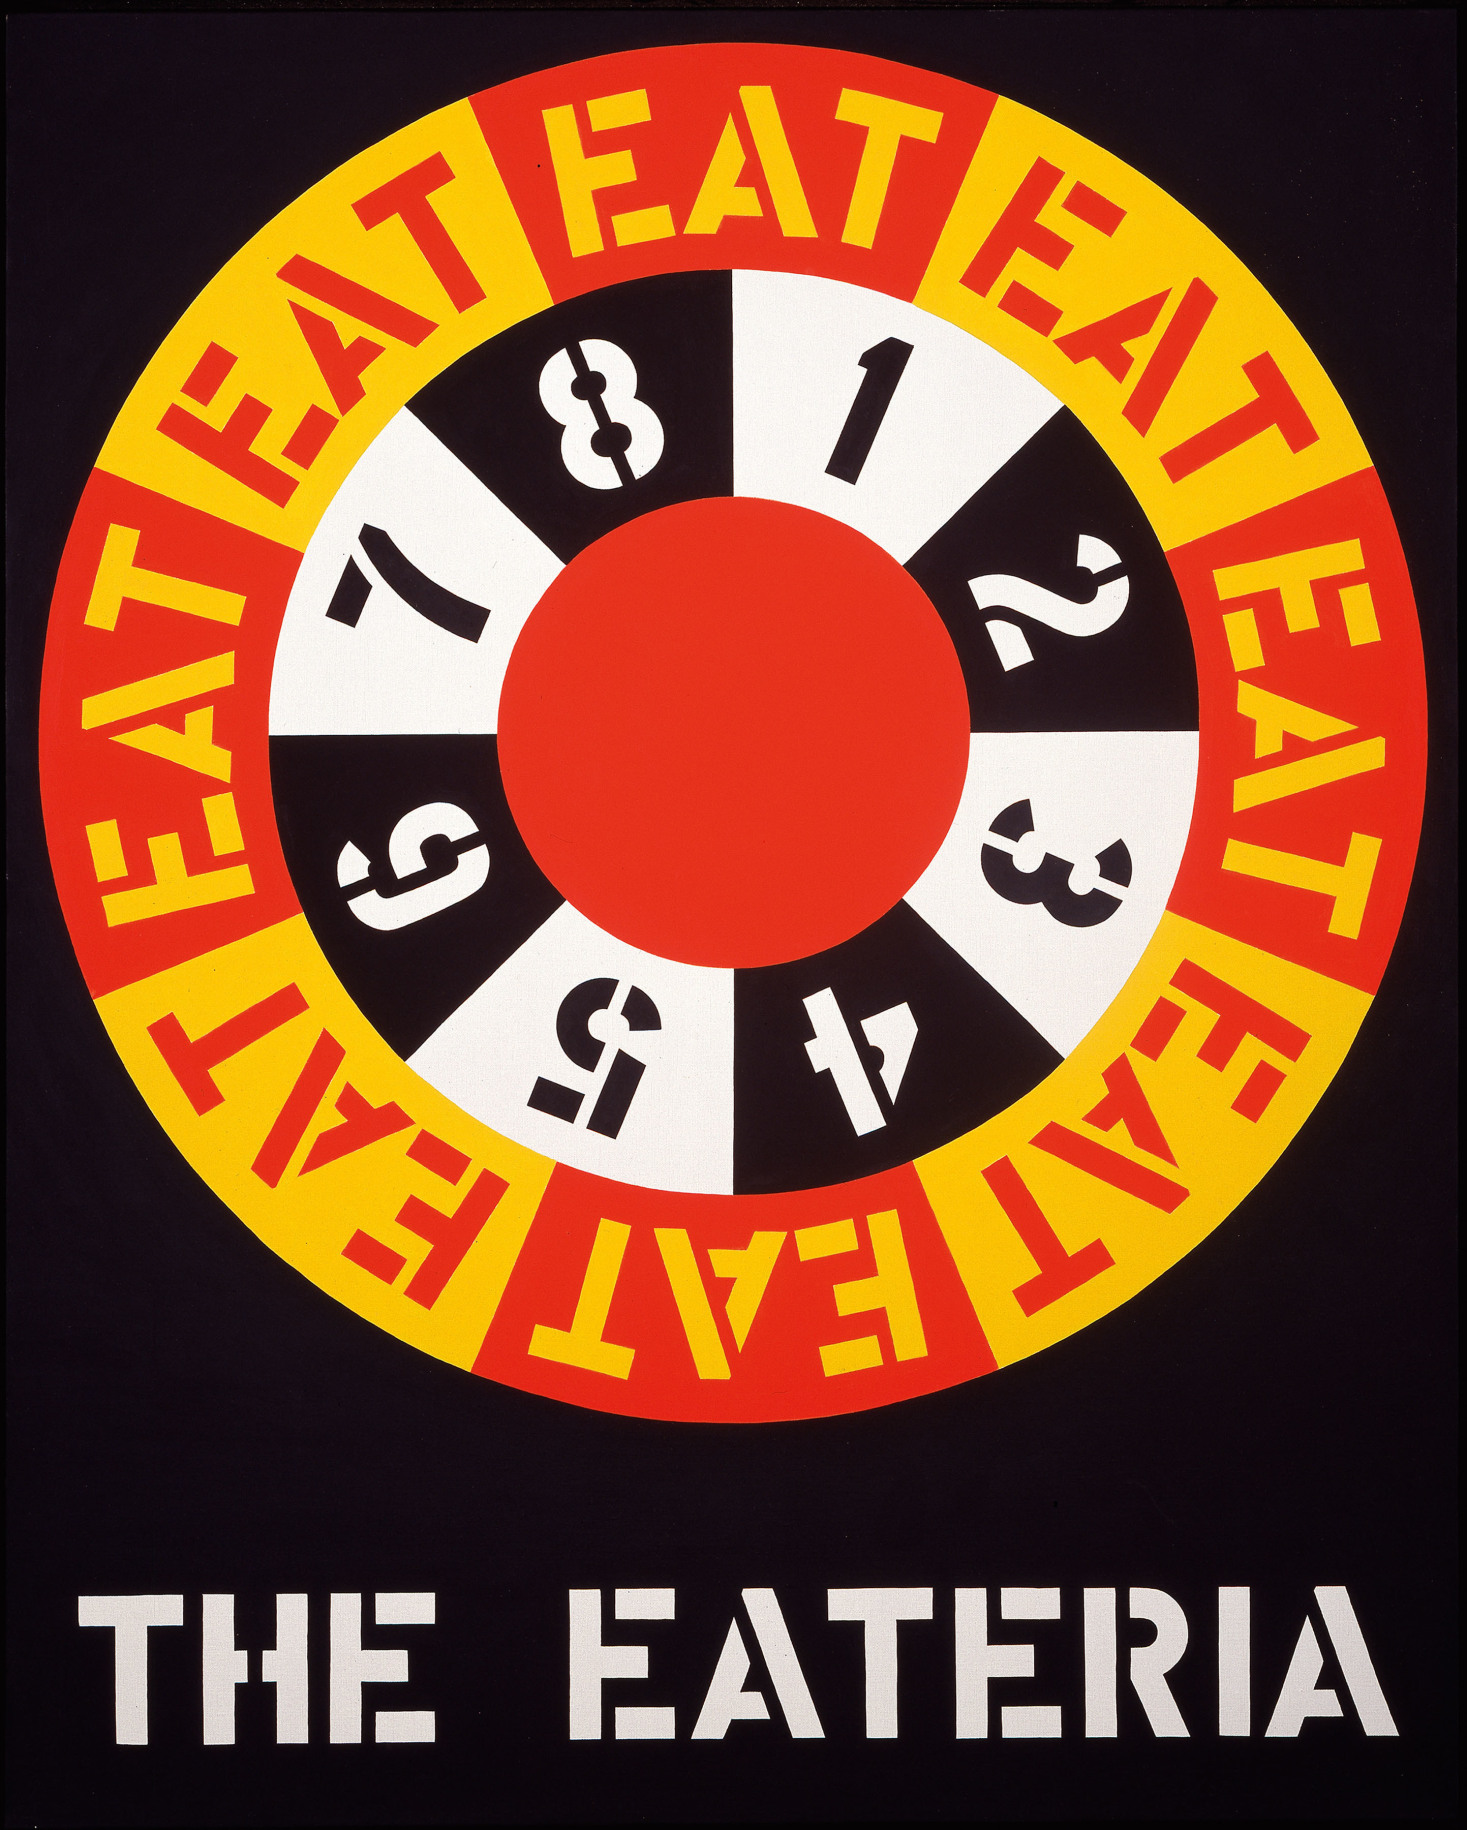 A 60 1/4 by 47 7/8 inch painting consisting of a large circular design and text against a black ground. The work's title, &quot;The Eateria,&quot; appears in white stenciled letters across the bottom of the canvas. Above this is a red circle surrounded by a ring containing the numerals one through eight alternating between black against a white ground and white against a black ground. This is surrounded by a ring containing the word EAT, painted in stenciled letters eight times, alternating between yellow letters against a red background and red letters against a yellow background.